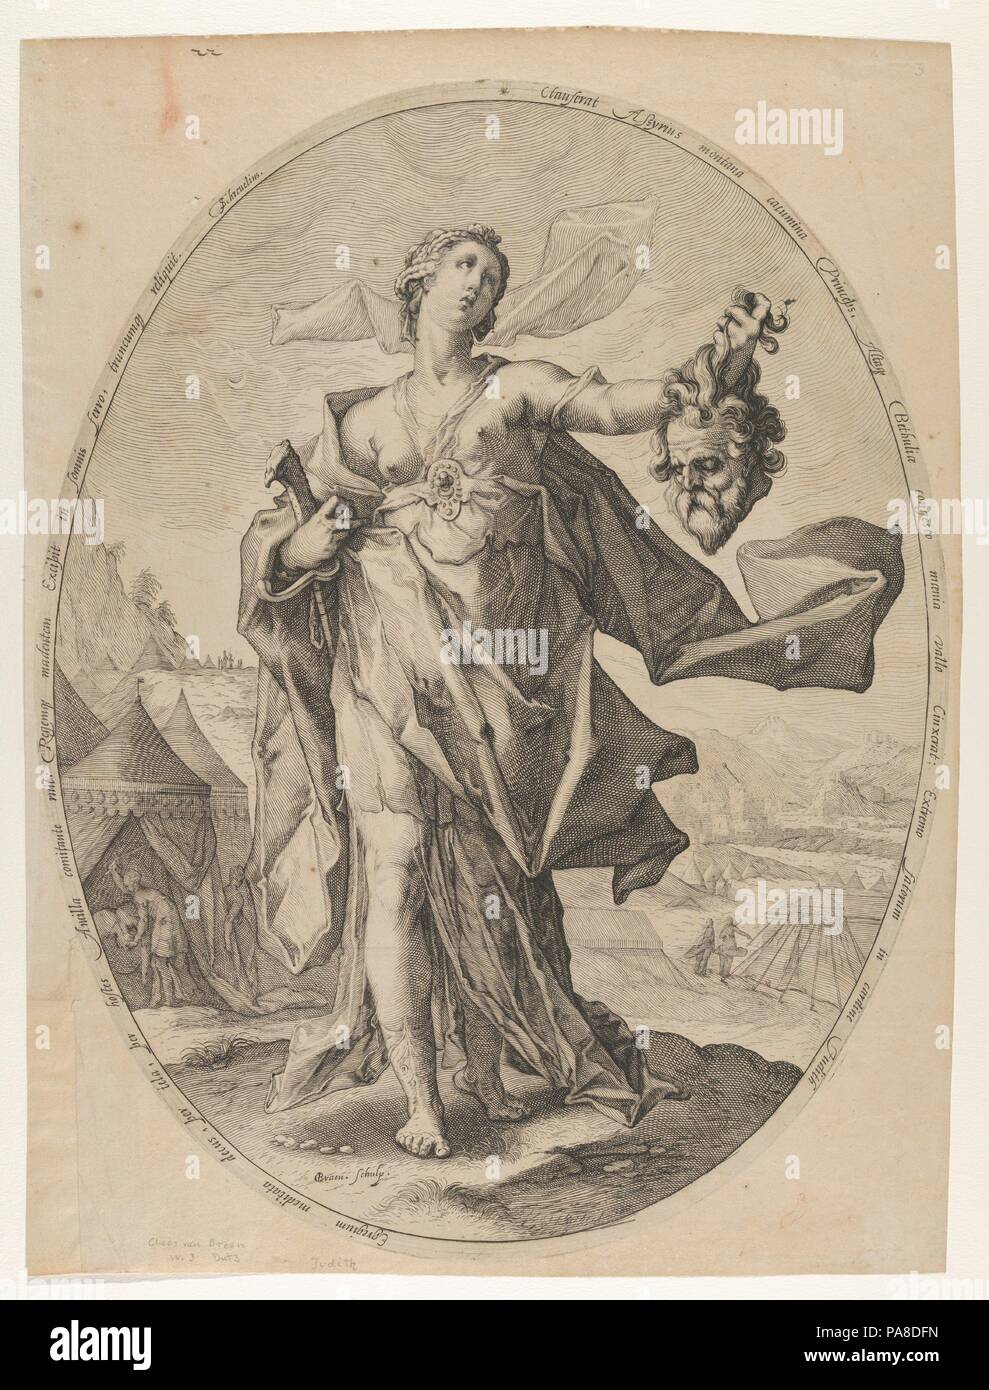 Judith from Heroes and Heroines of the Old Testament. Artist: After Hendrick Goltzius (Netherlandish, Mühlbracht 1558-1617 Haarlem); Nicolaes Braeu (Netherlandish, active Haarlem, ca. 1586-died 1600). Dimensions: Sheet: 17 5/16 x 13 in. (44 x 33 cm)  Plate (oval): 16 1/2 x 12 13/16 in. (41.9 x 32.5 cm). Date: ca. 1597. Museum: Metropolitan Museum of Art, New York, USA. Stock Photo